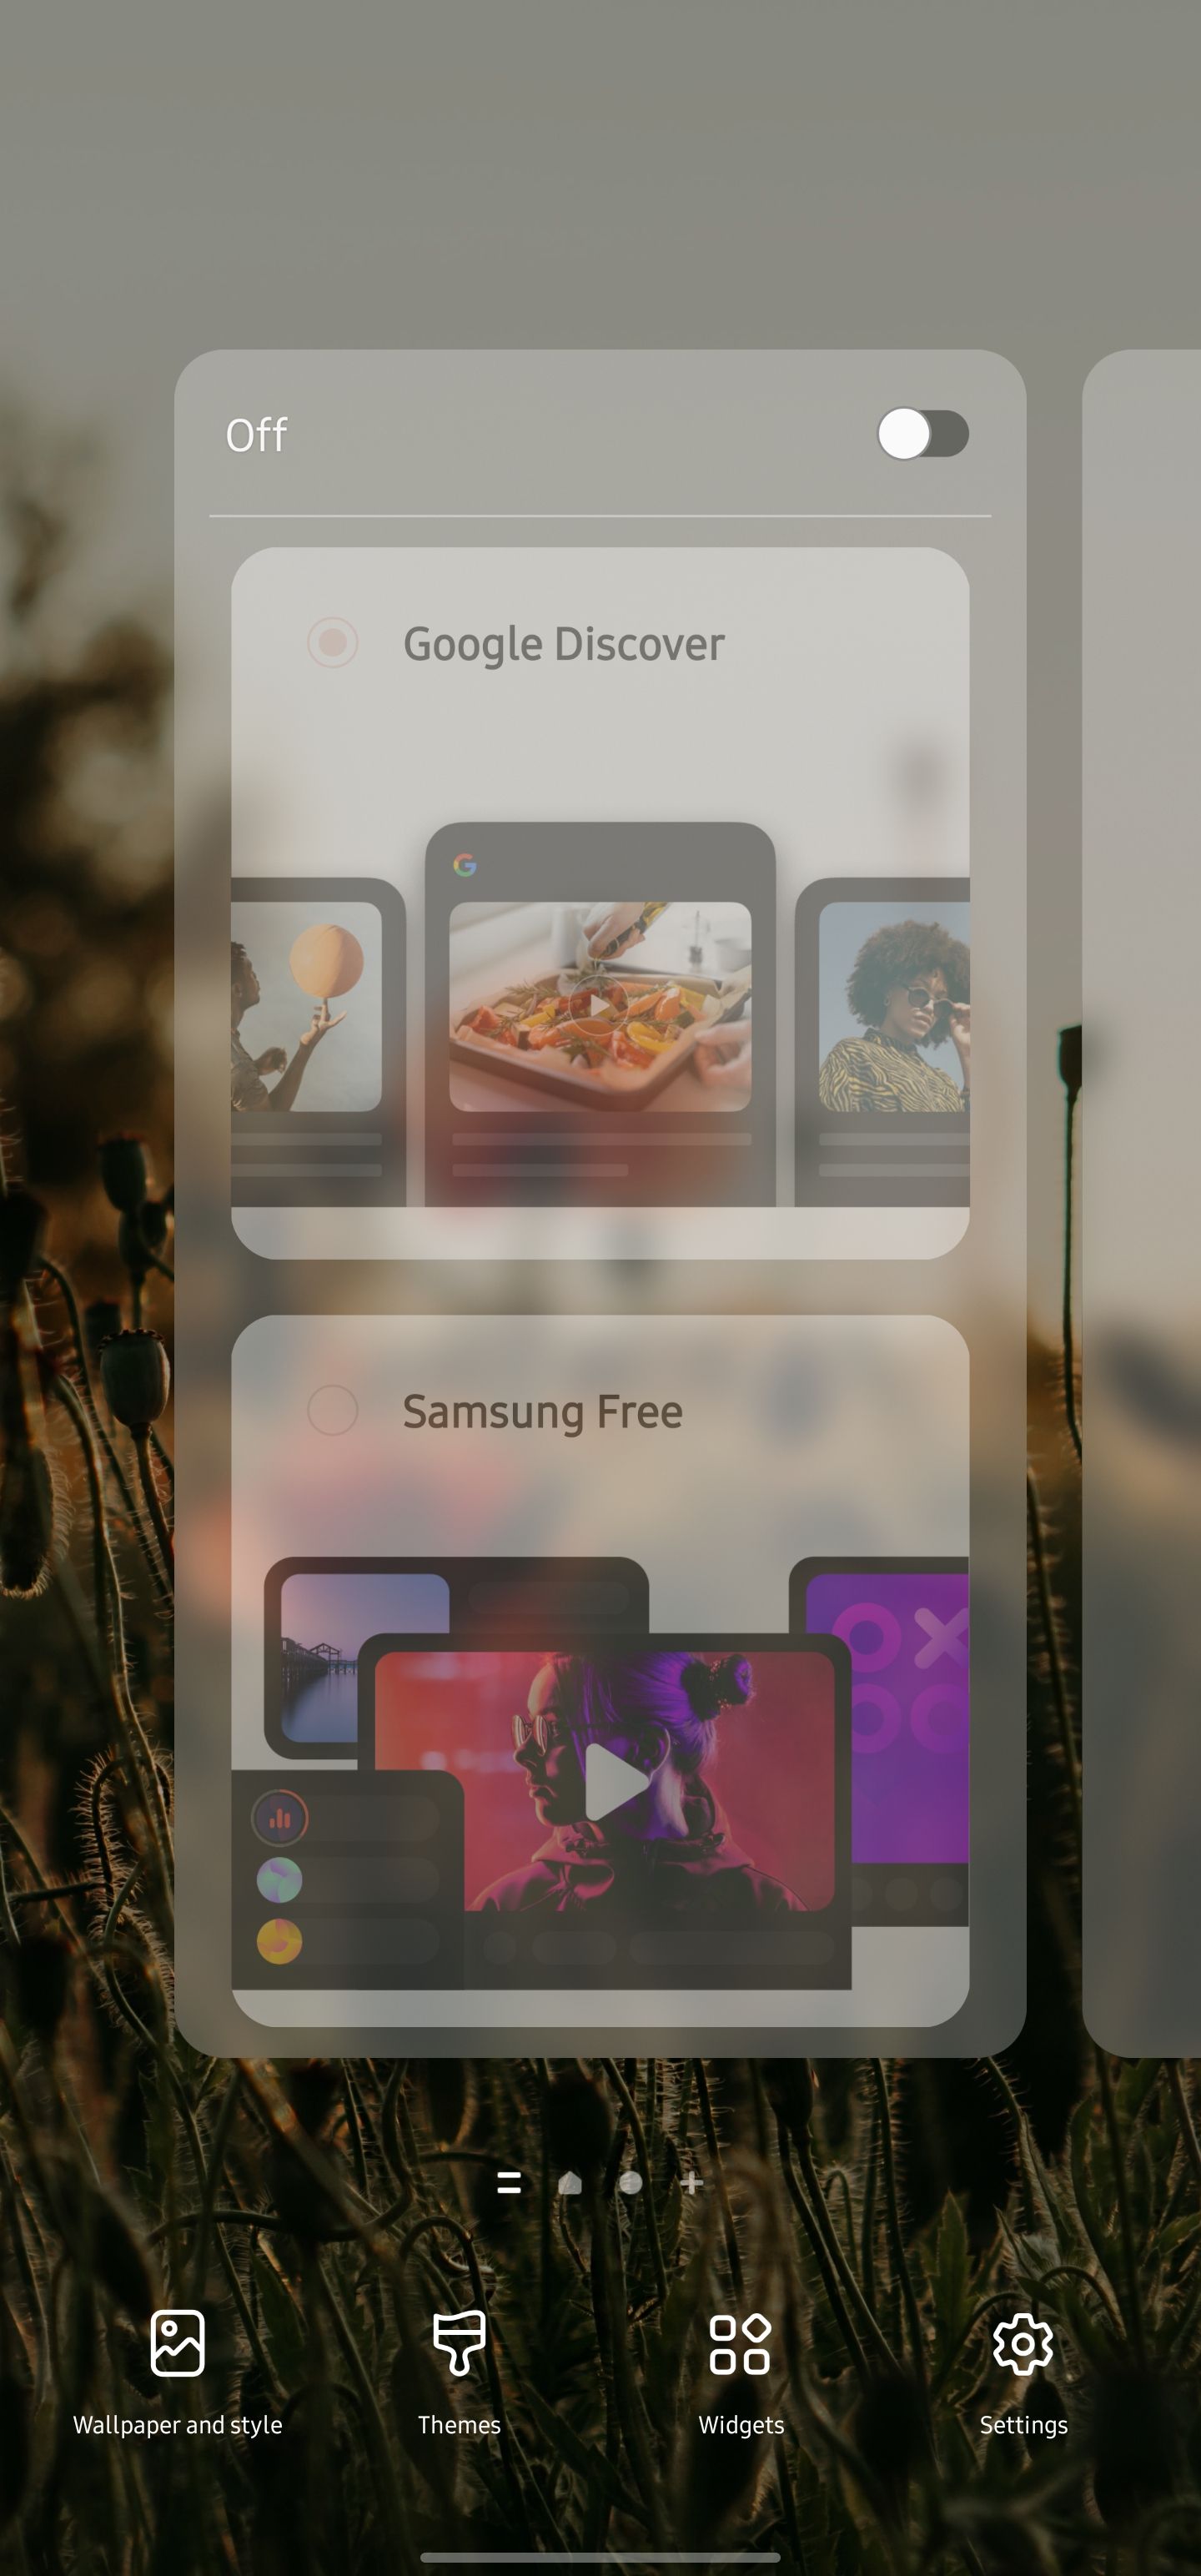 Turning off Samsung Free and Google Discover on Samsung phone